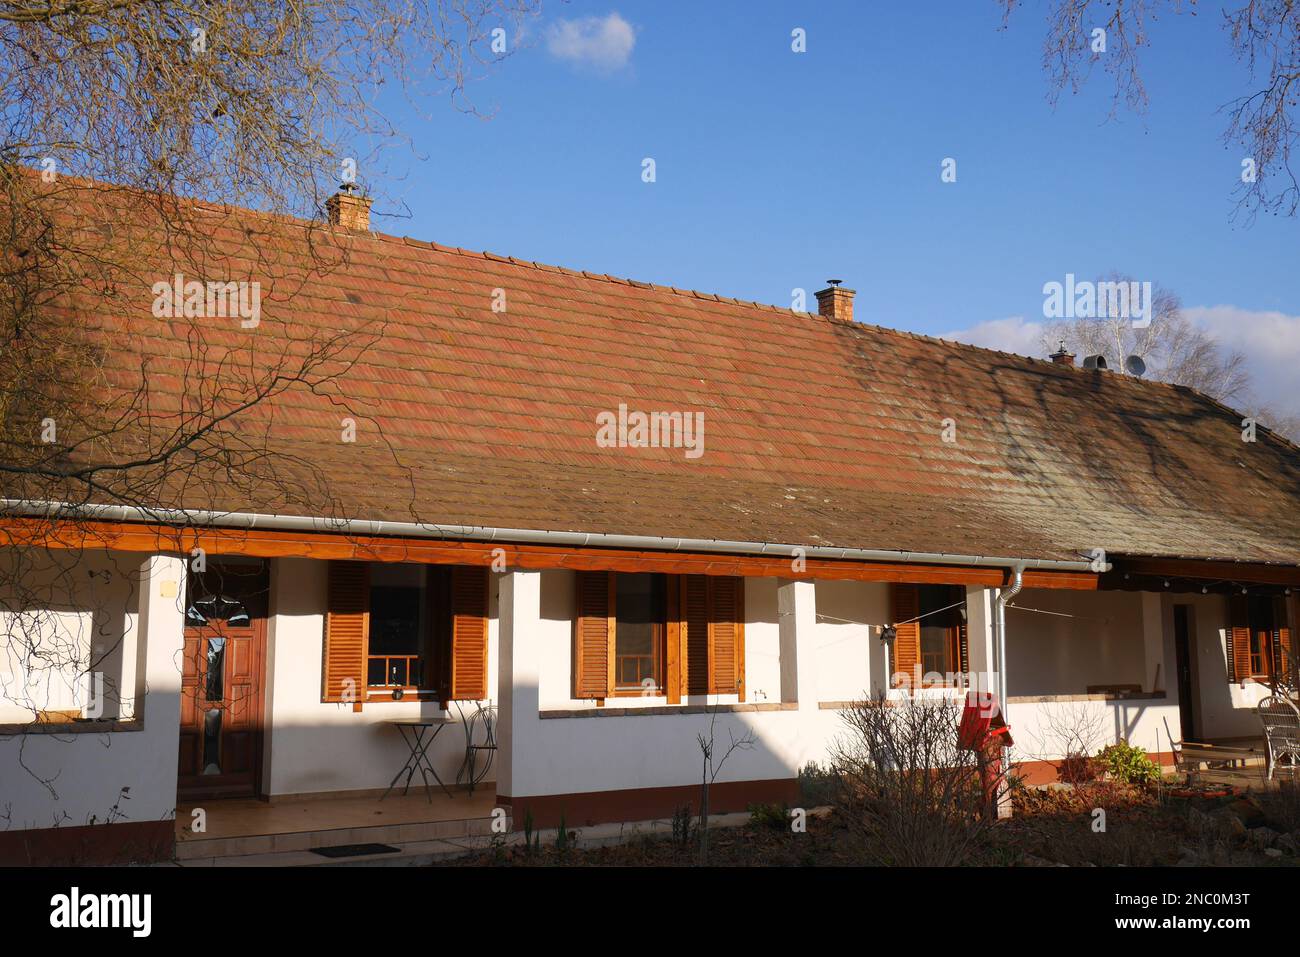 Traditional peasant longhouse, paraszthaz, with open veranda, in a village, Hungary Stock Photo